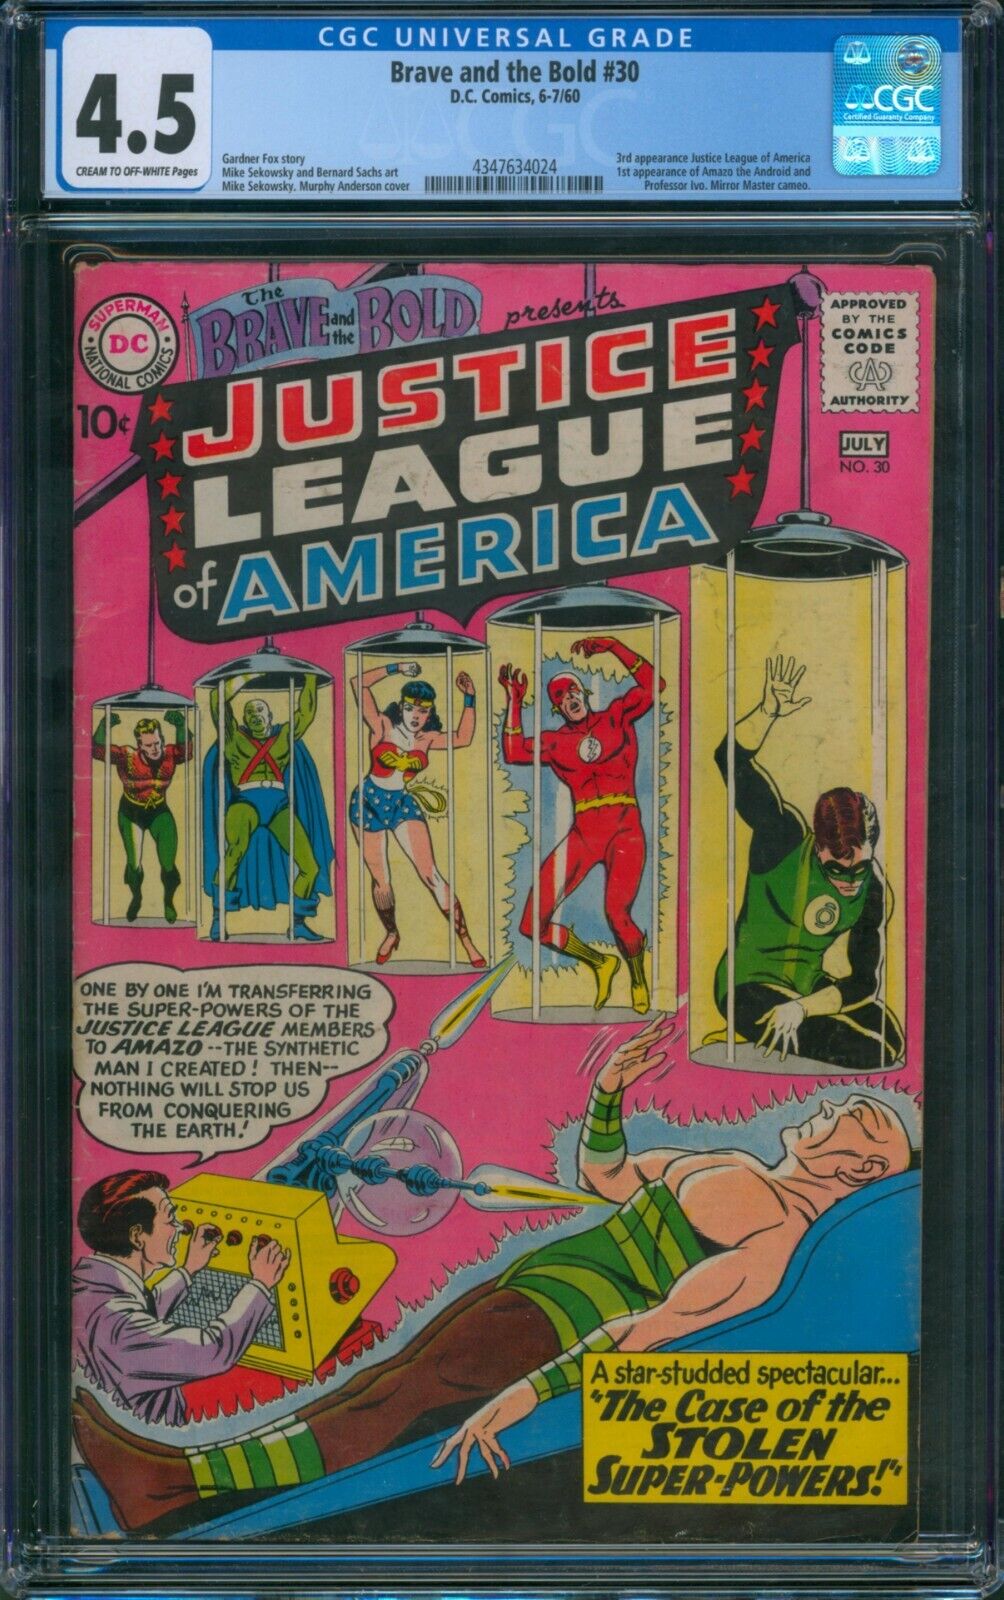 BRAVE and the BOLD #30 ⭐ CGC 4.5 ⭐ 3rd App of Justice League of America DC 1960